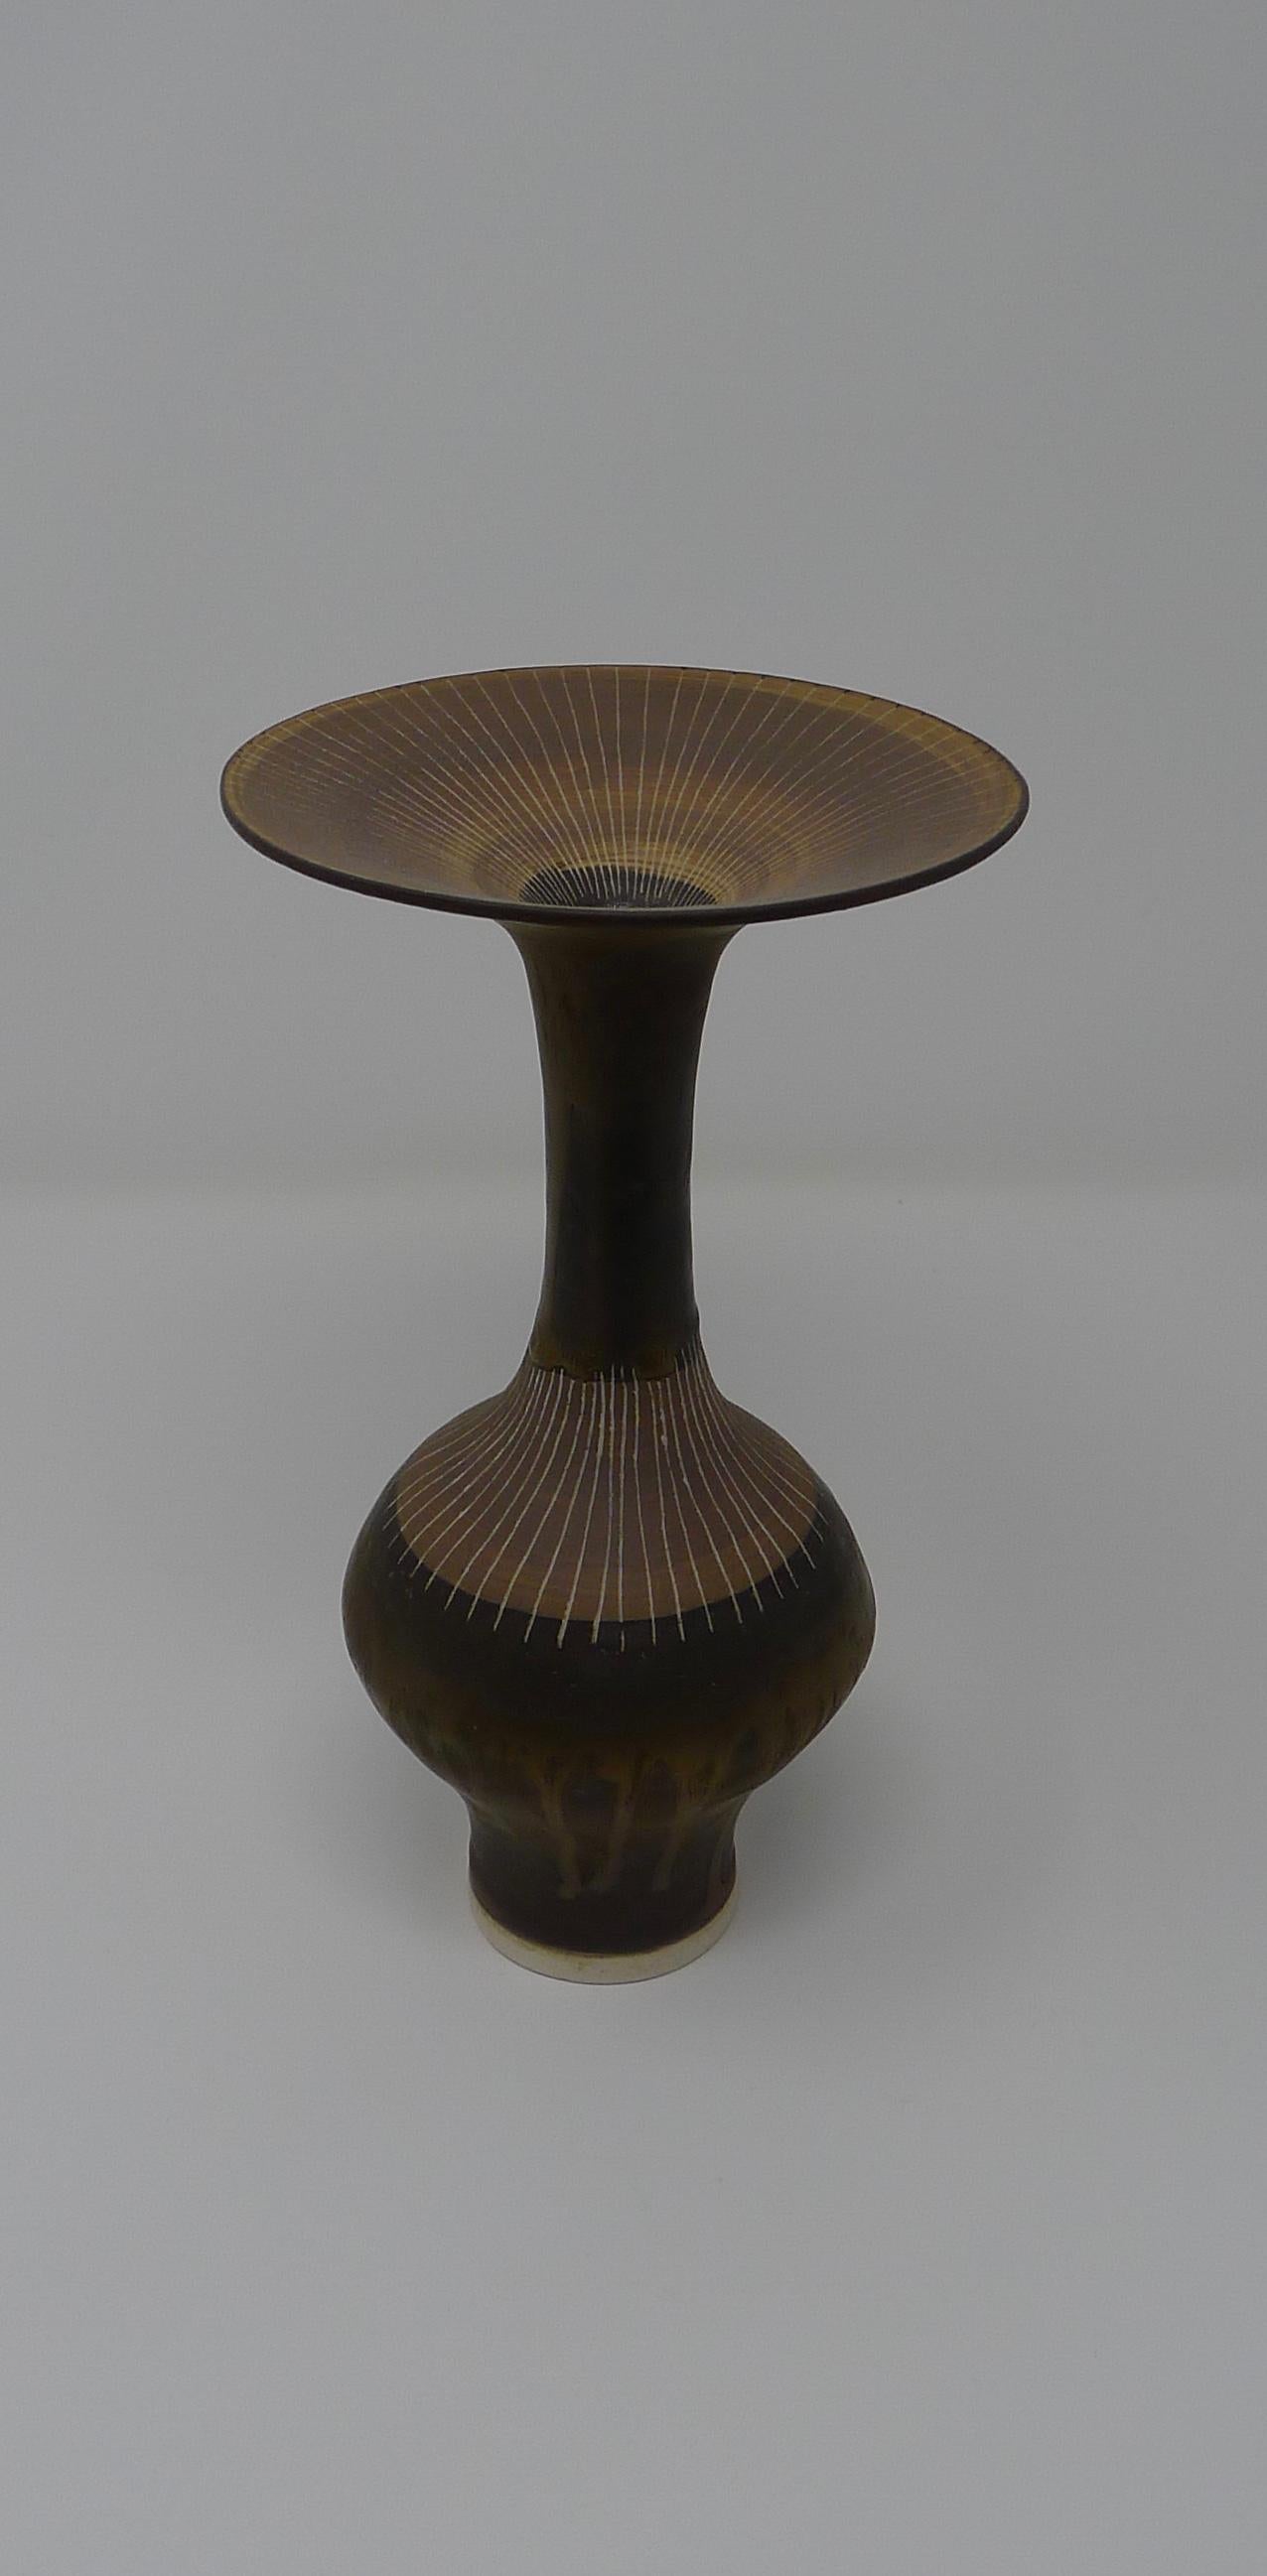 Lucie Rie, tall porcelain bottle form vase with flaring rim, bronzed sgrafitto lines through light brown slip. Signed with impressed mark to underside.

Excellent Provenance from important private collection. 
Perfect condition.